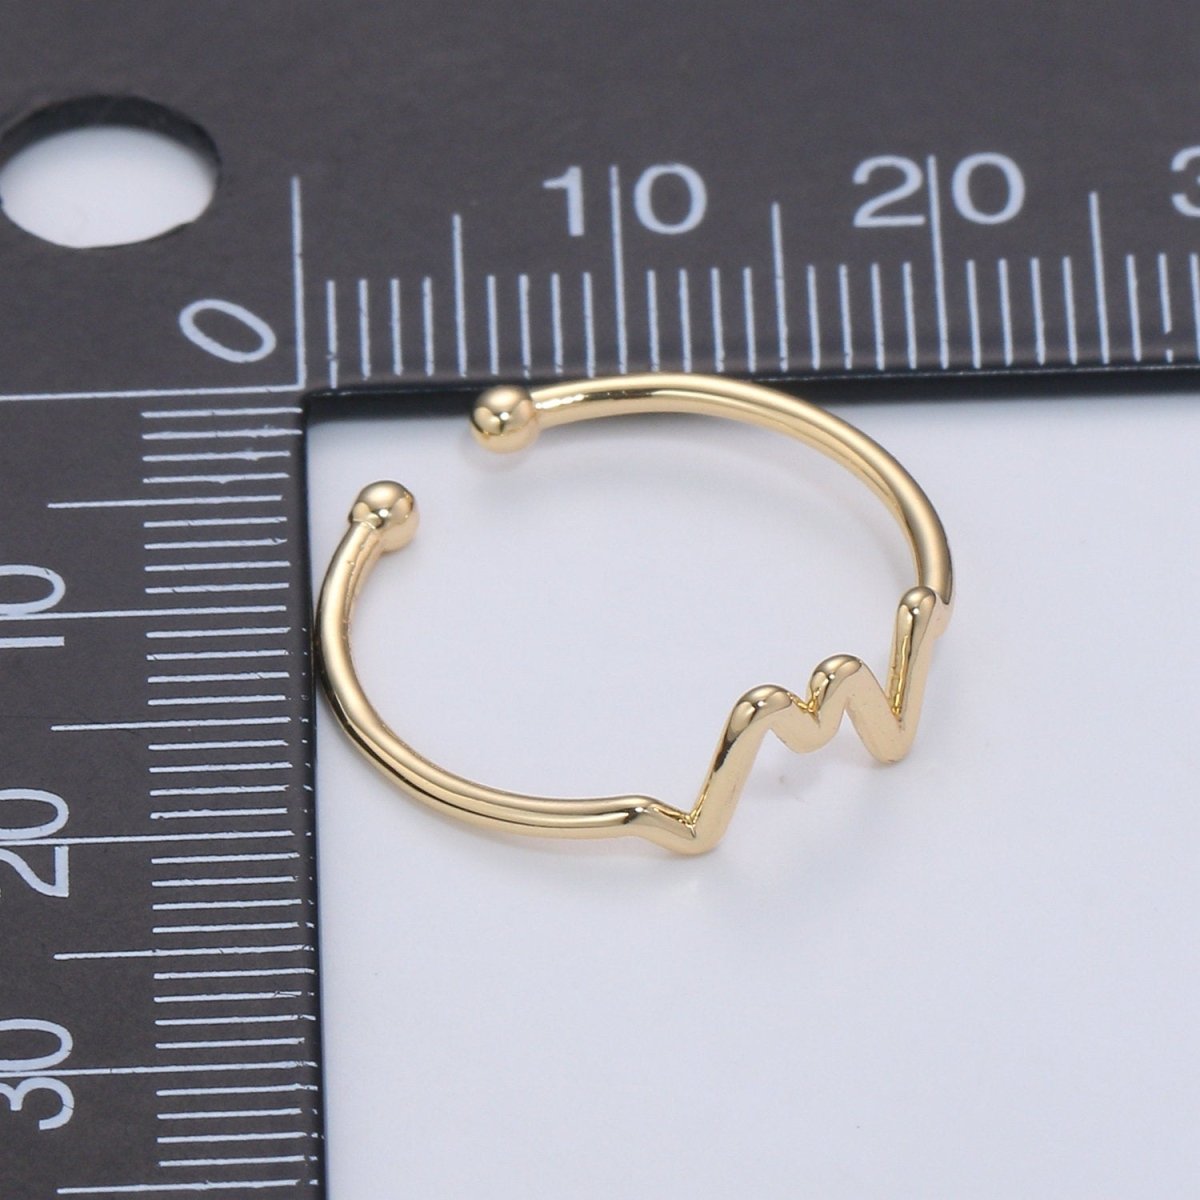 Thin Chevron Ring - Gold Stacking Ring - Dainty Ring - Open Ring - Heart Beat Ring - Thin Band - Simple Gold Ring Minimalist Jewelry R-069 - DLUXCA